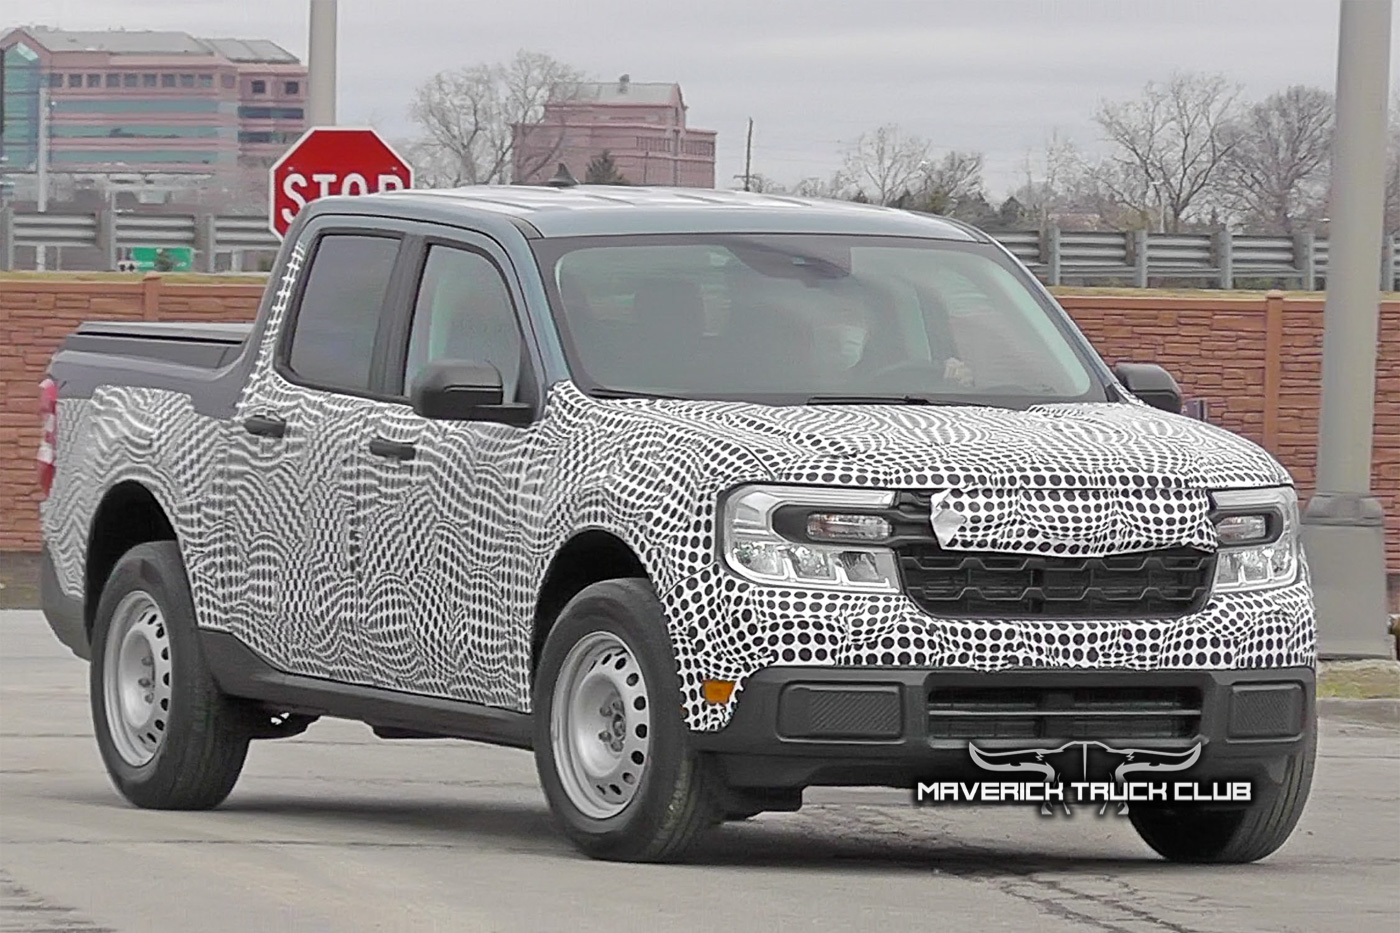 Ford Maverick Base Maverick XL Pickup Spied with Steelies, FWD, Unique Grille! + First Ever Maverick Video base-ford-maverick-truck-steelies-fwd-grille-spy-pics-10